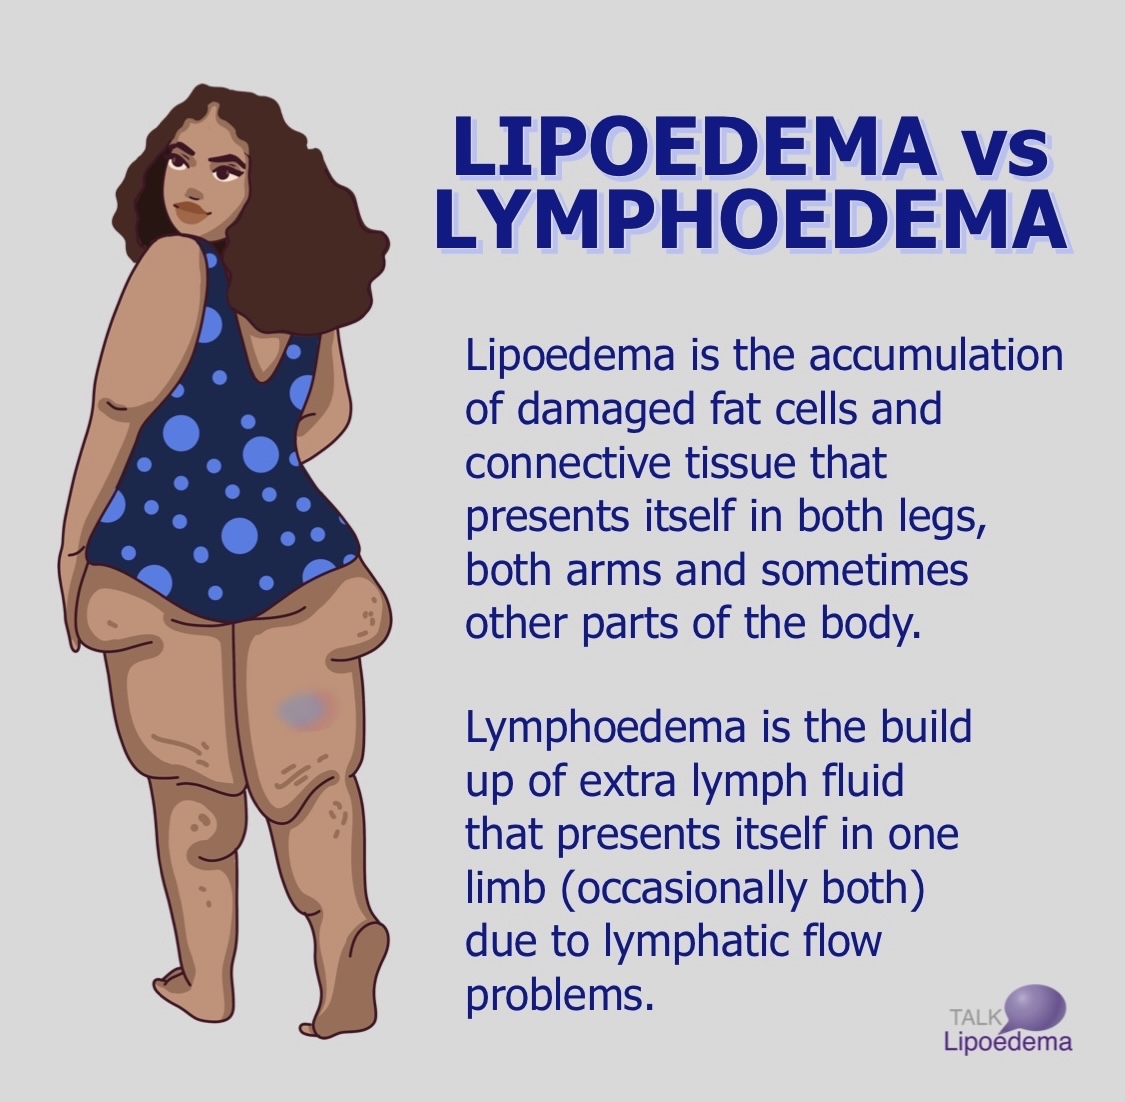 TalkLipoedema on X: Lipoedema patients can also suffer with